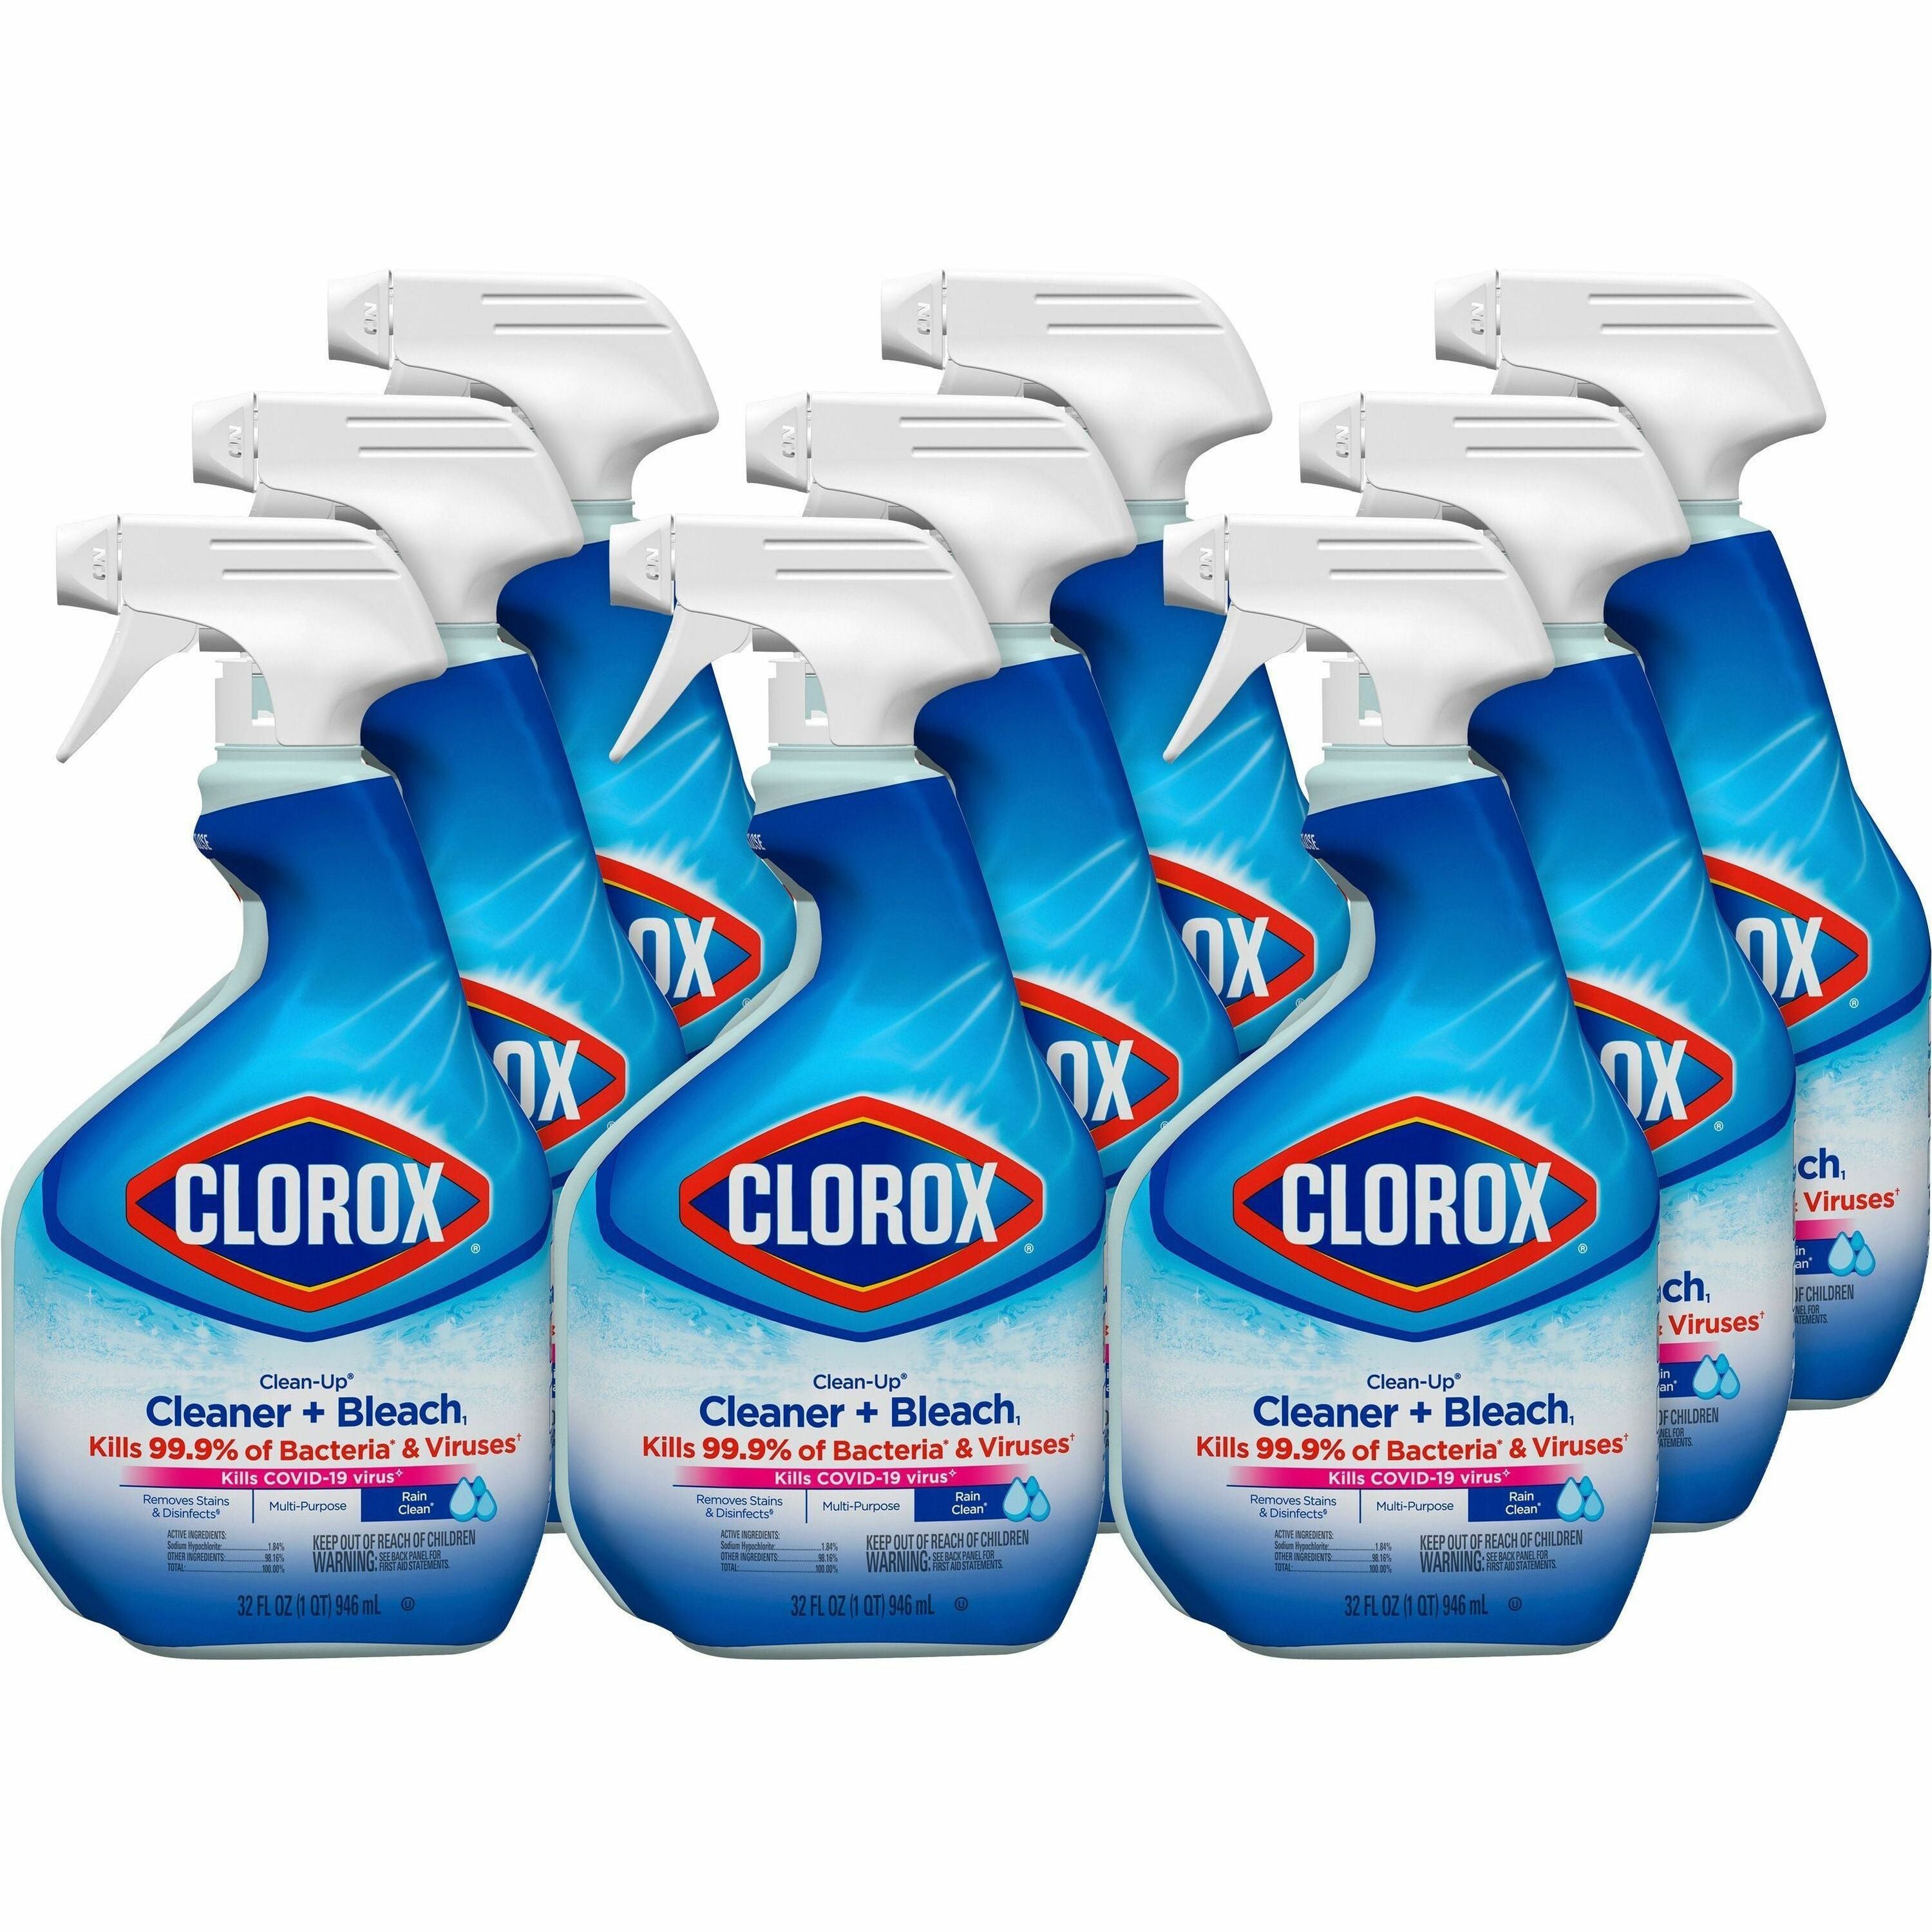 Clorox Clean-Up All Purpose Cleaner with Bleach - For Multipurpose - 32 fl oz (1 quart) - Rain Clean Scent - 9 / Carton - Deodorize, Disinfectant, Easy to Use - Multi - 1